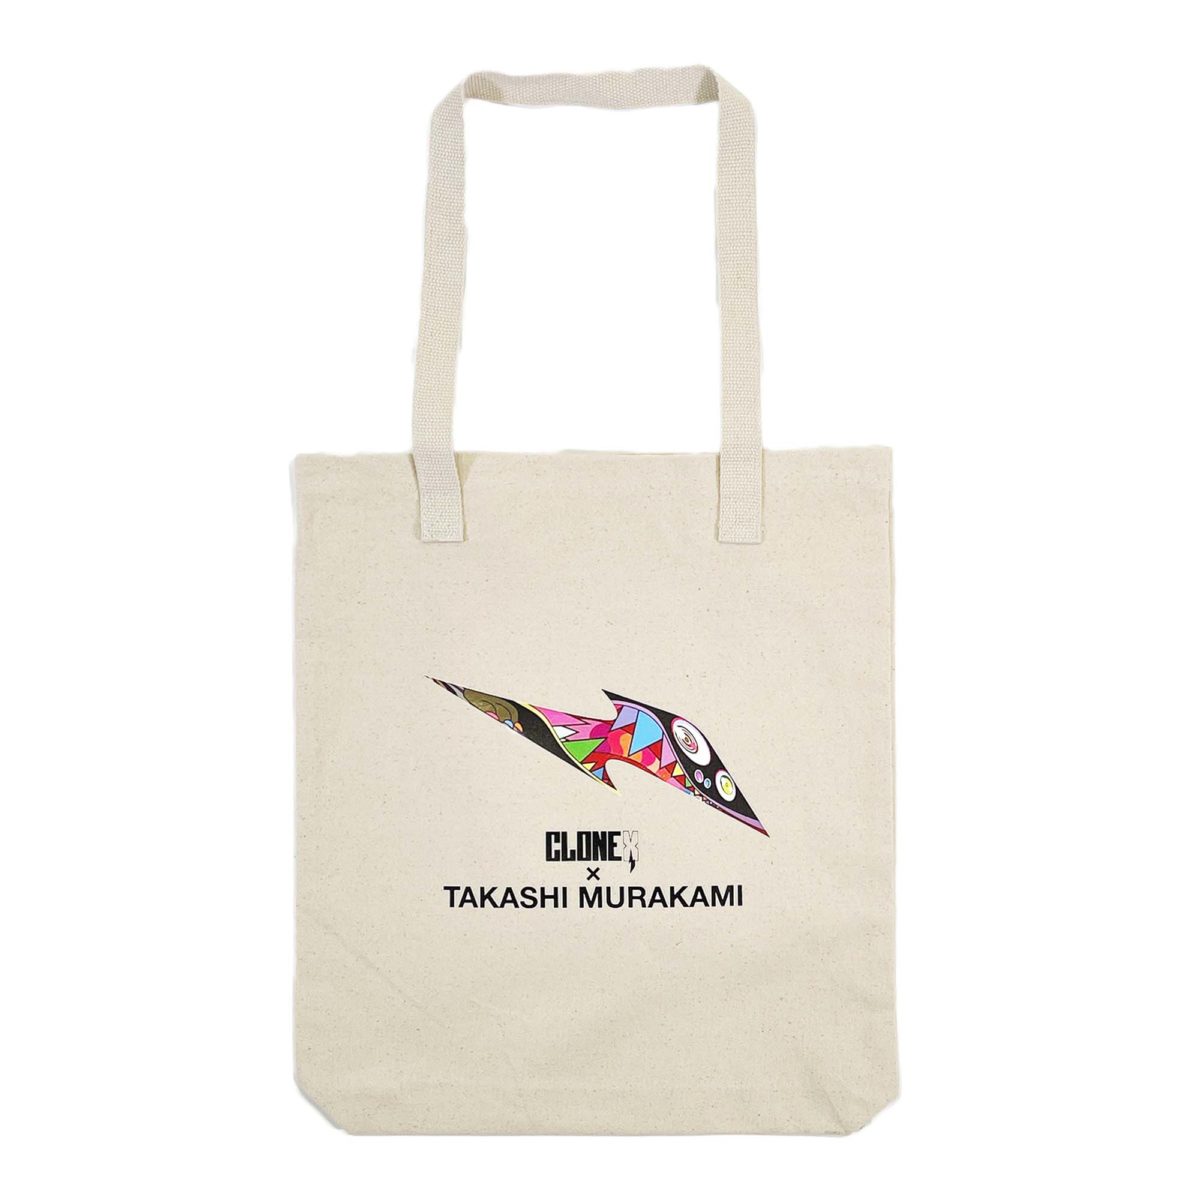 ONE (1) SOLD OUT RARE NEW SEALED TAKASHI MURAKAMI x LOQI X FLOWER WHITE  TOTE BAG